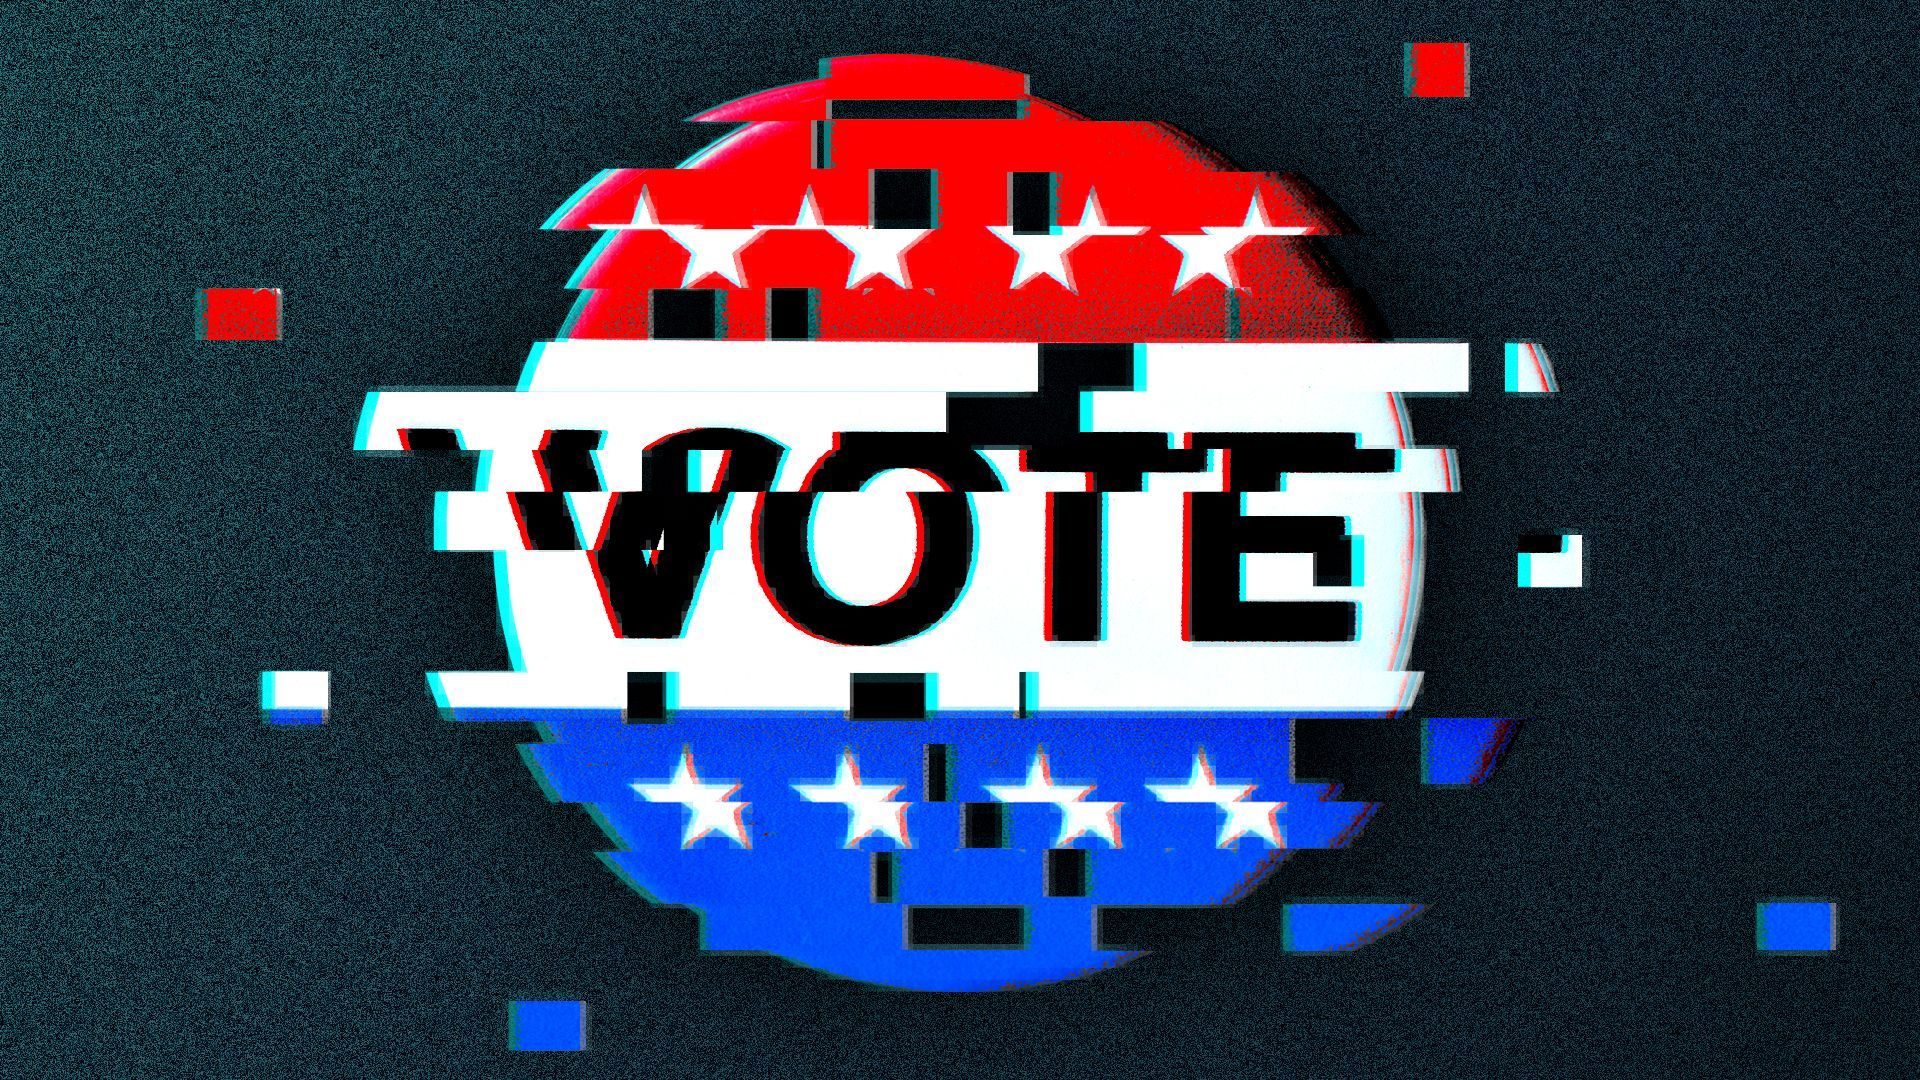 Illustration of a glitching, distorted VOTE button